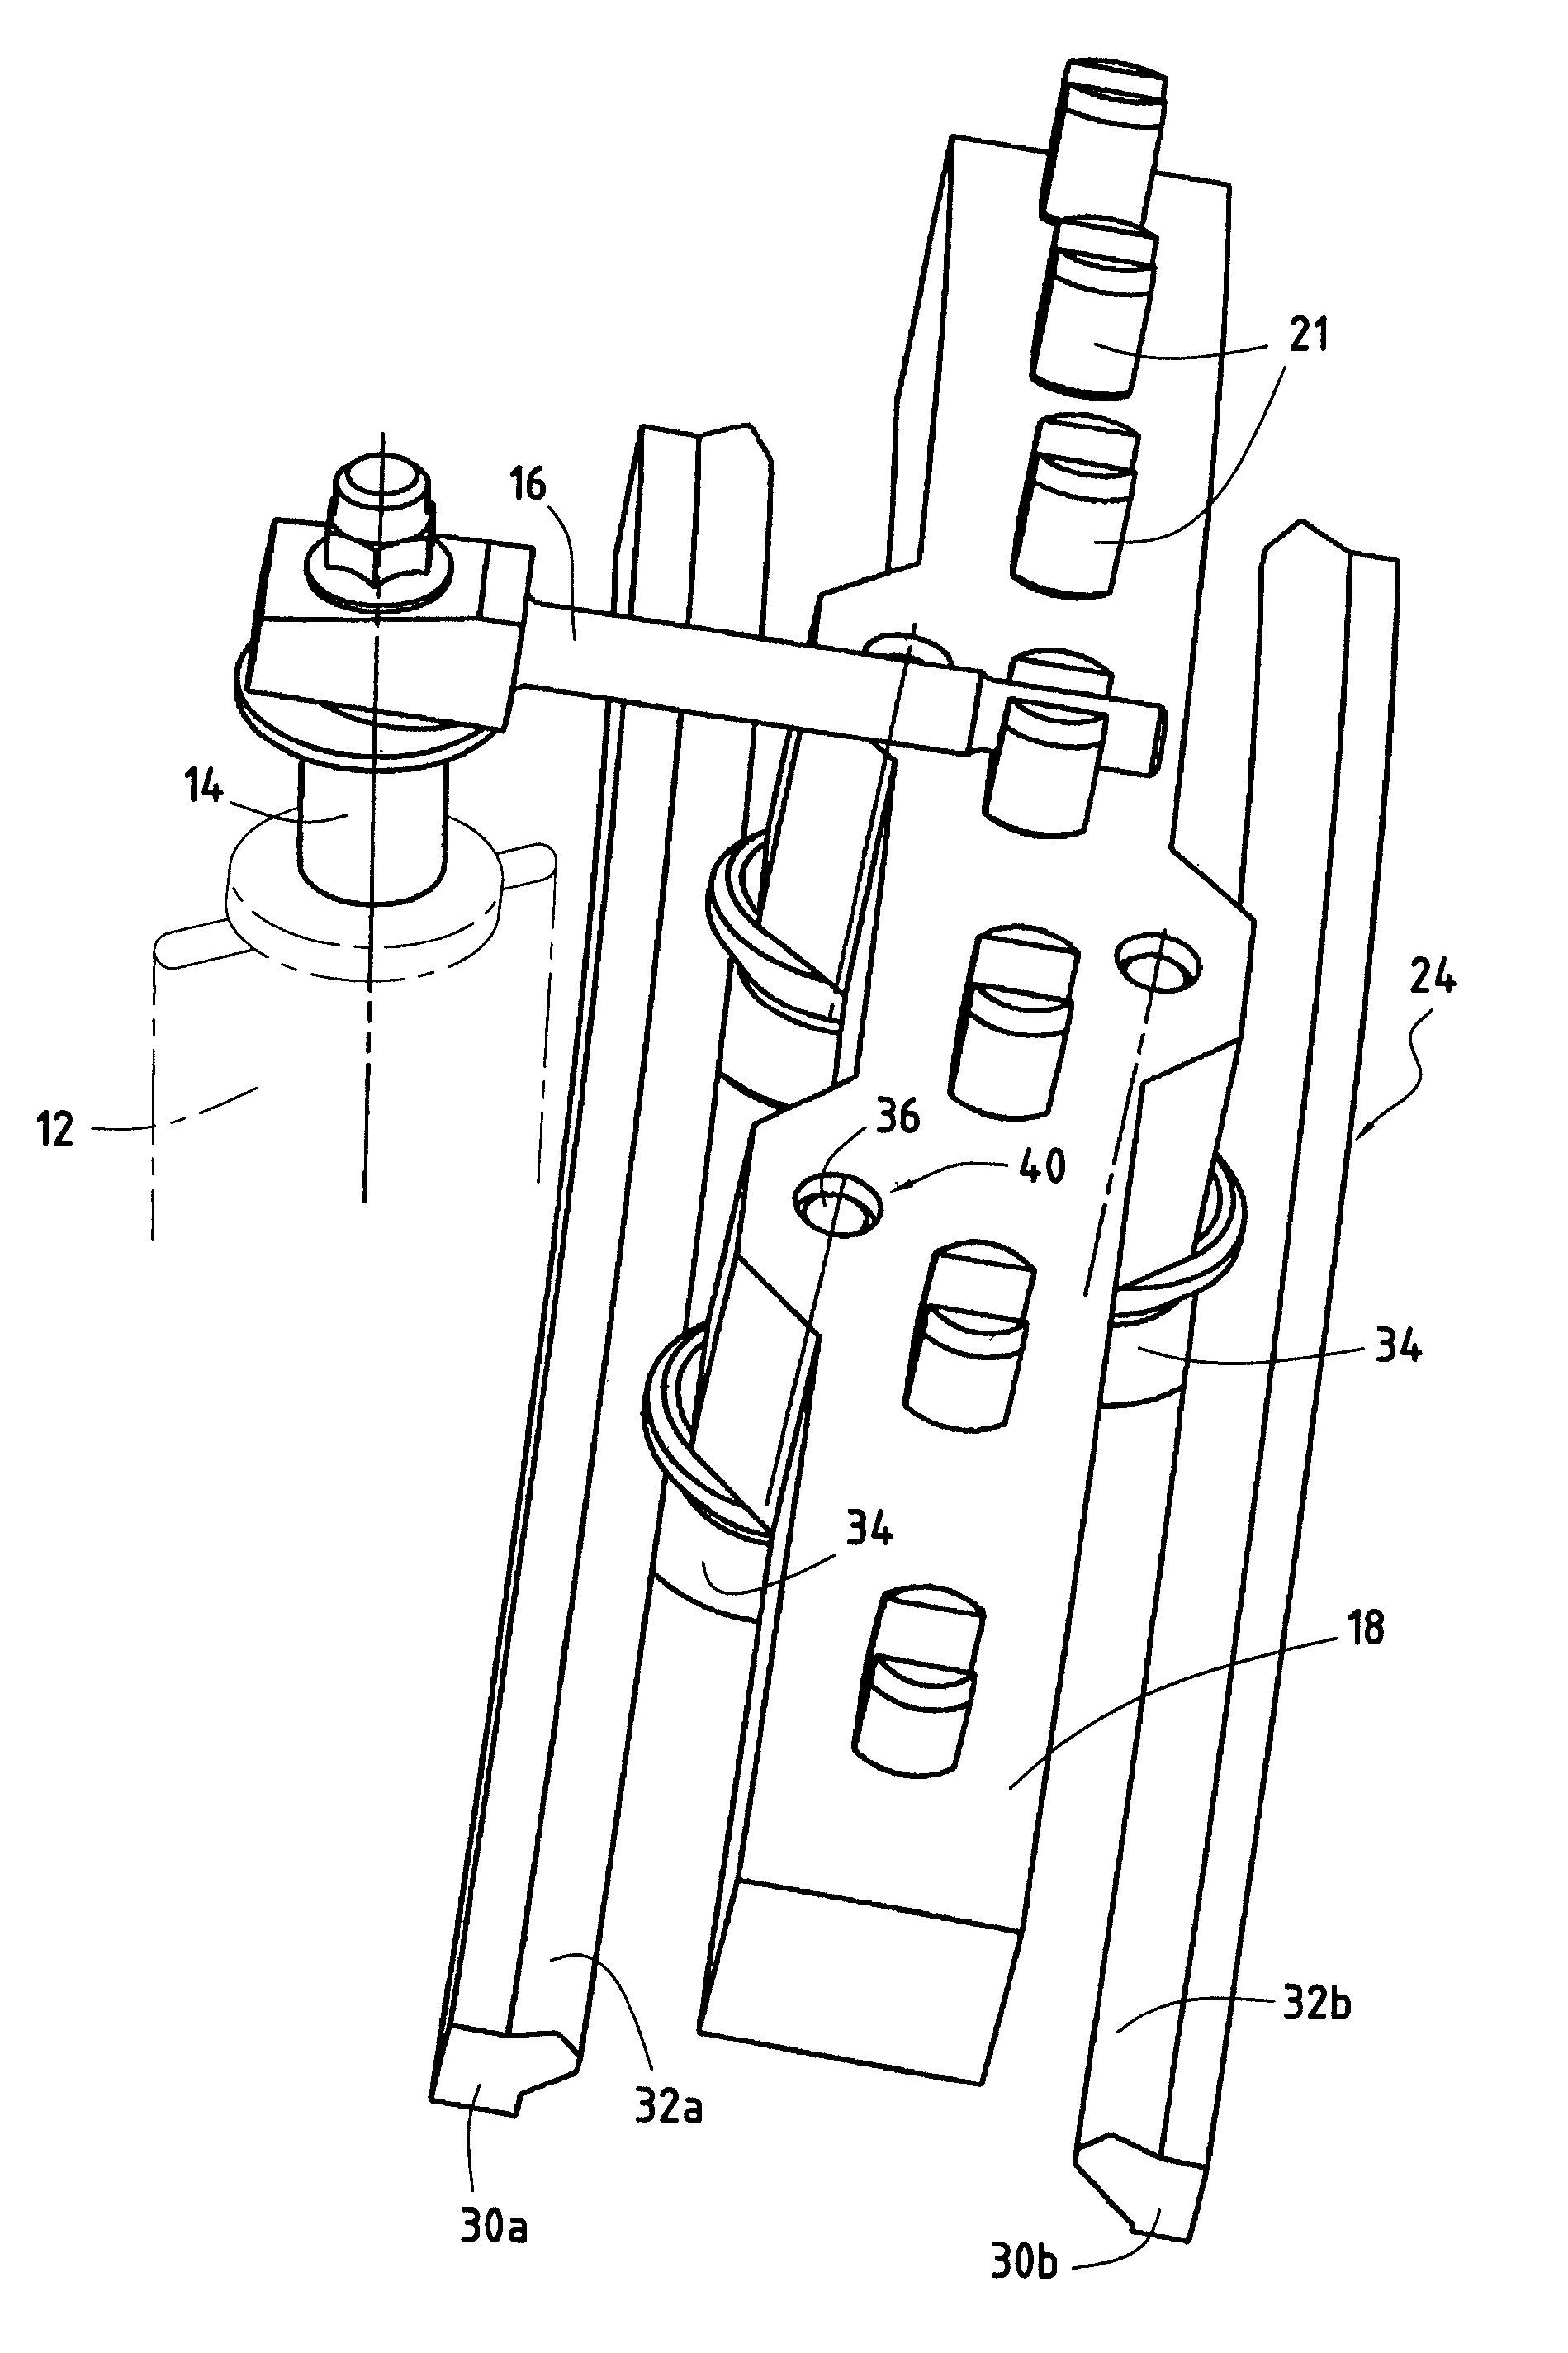 Turbomachine stator including a stage of stator vanes actuated by an automatically centered rotary ring